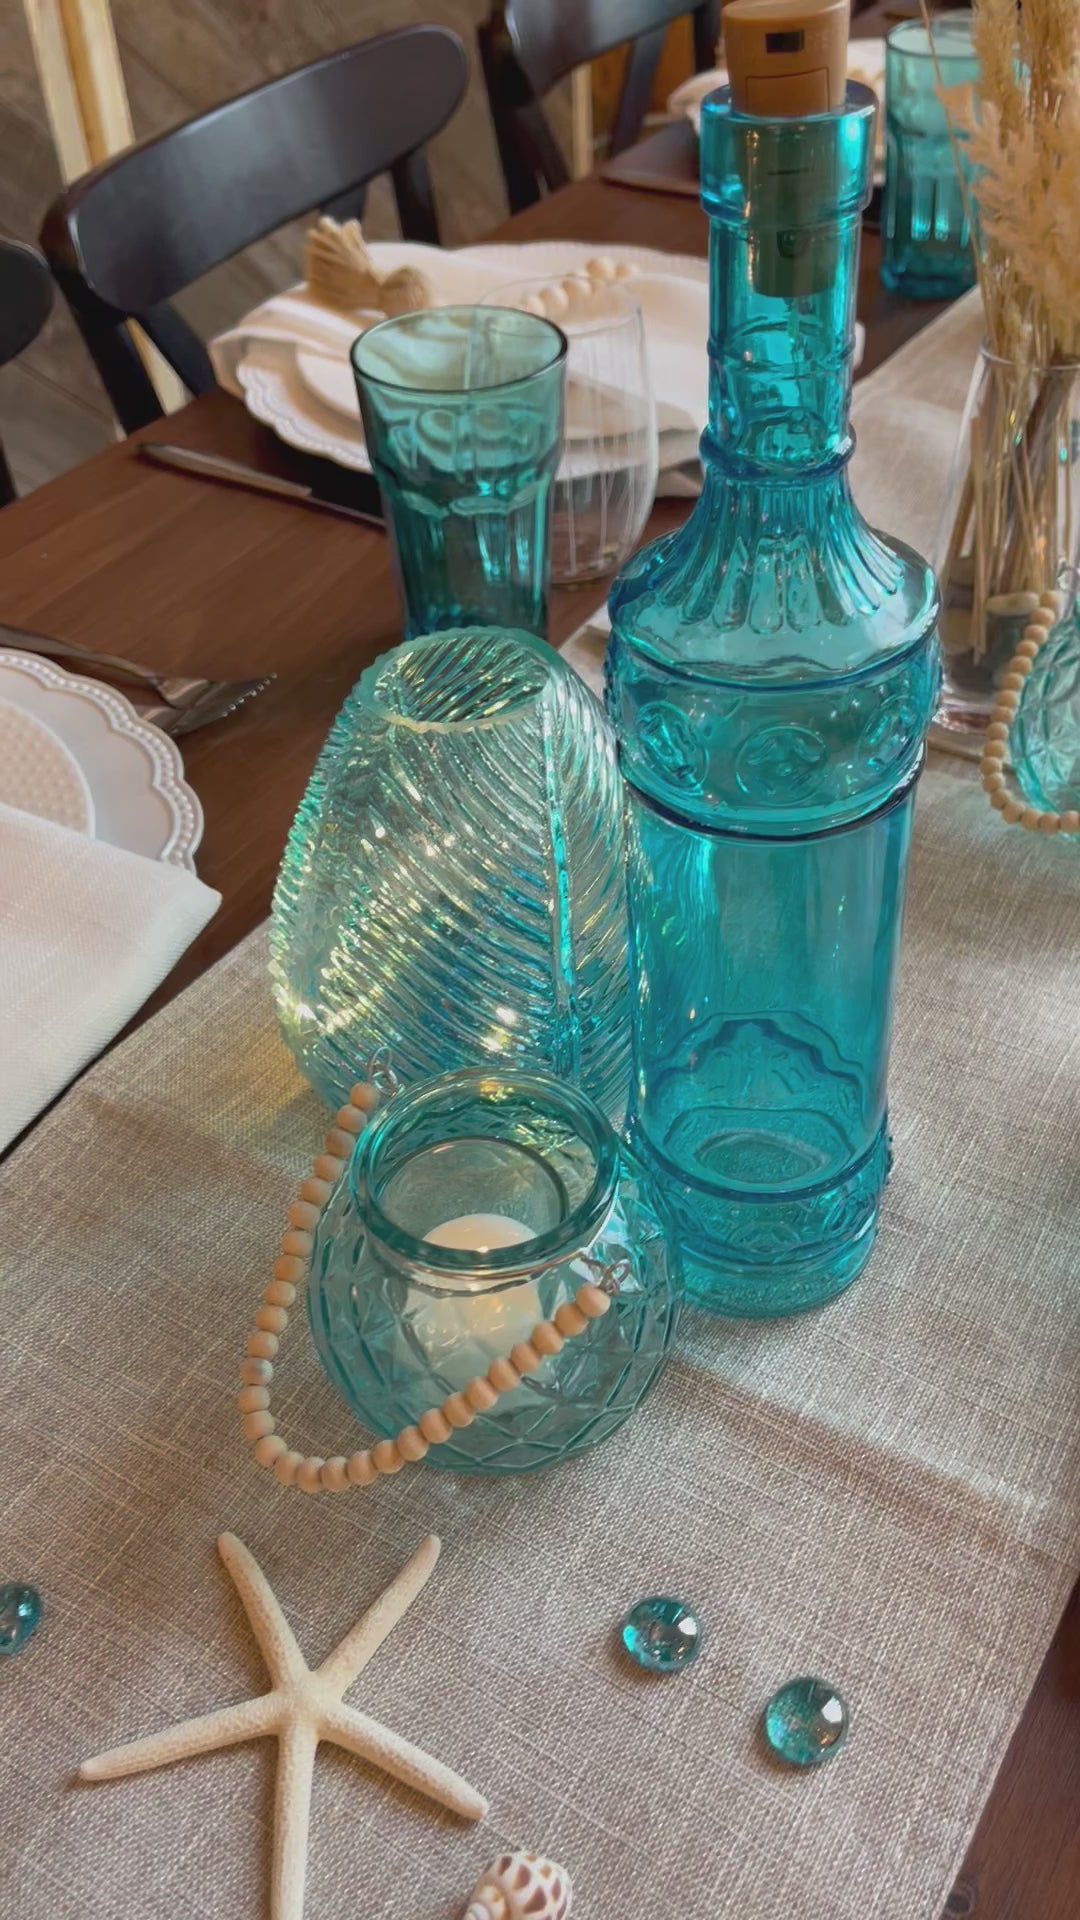 This glass teal accent light is 6 inches tall x 7 inches wide. For visual interest teal glass bead have been added inside so that when the fairy lights are illuminated they sparkle.